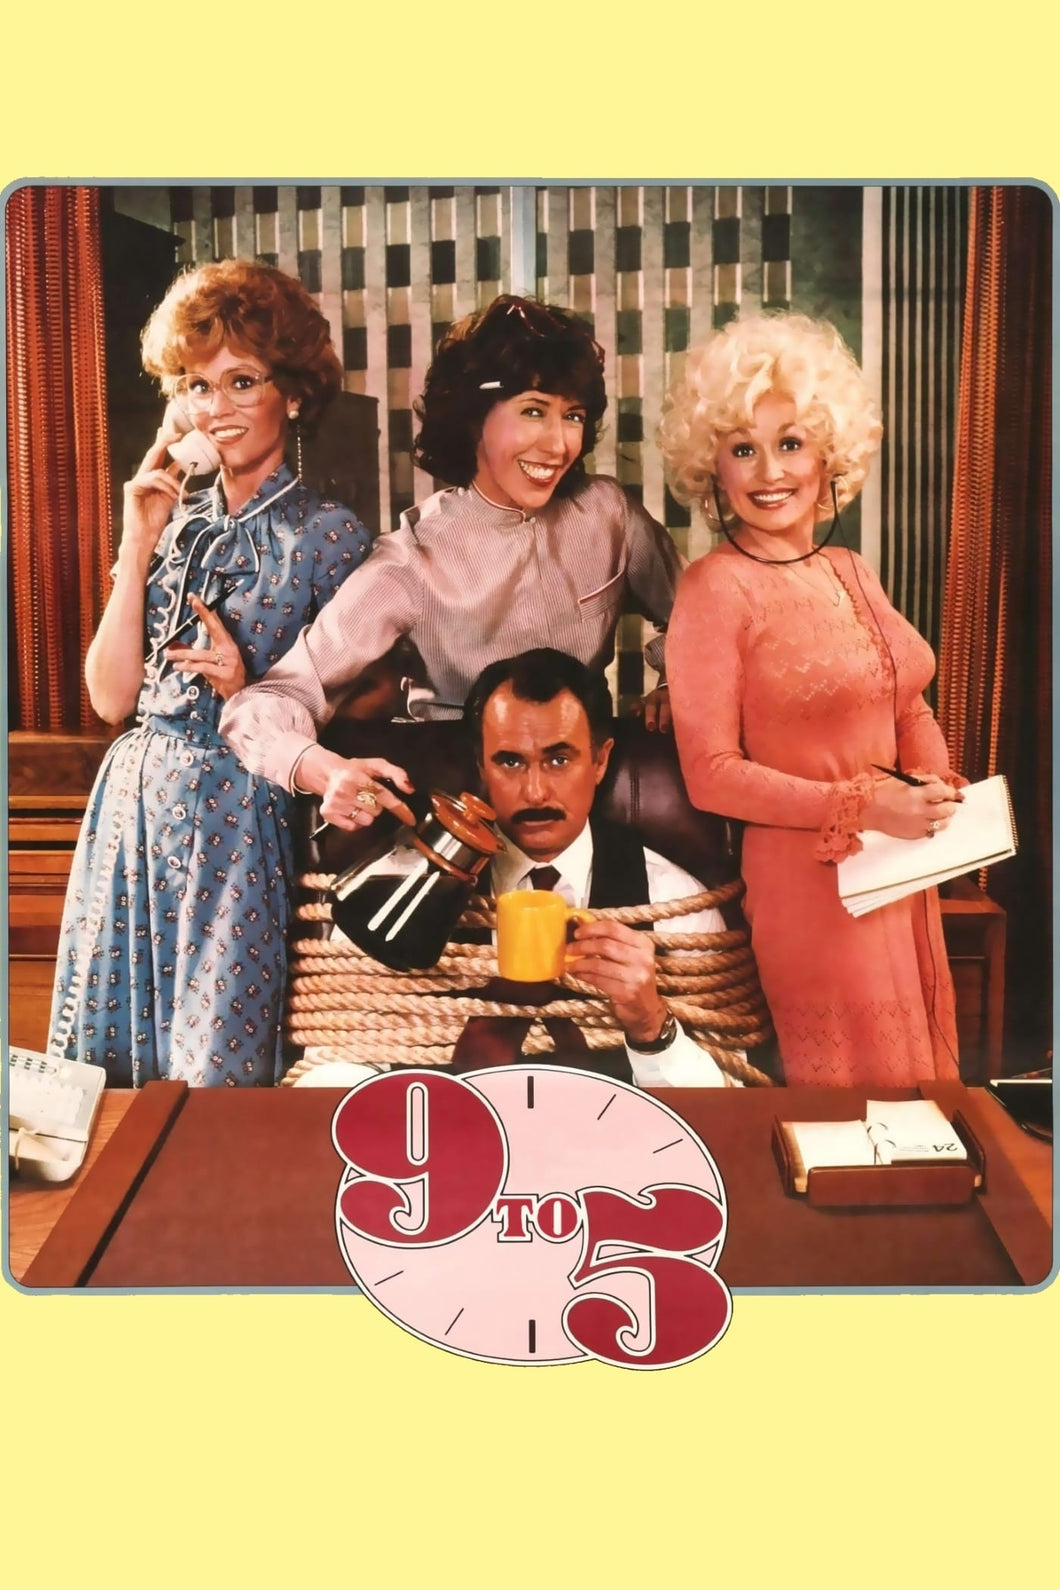 Nine to Five (1980) Movie Poster High Quality Glossy Paper A1 A2 A3 A4 A3 Framed or Unframed!!!